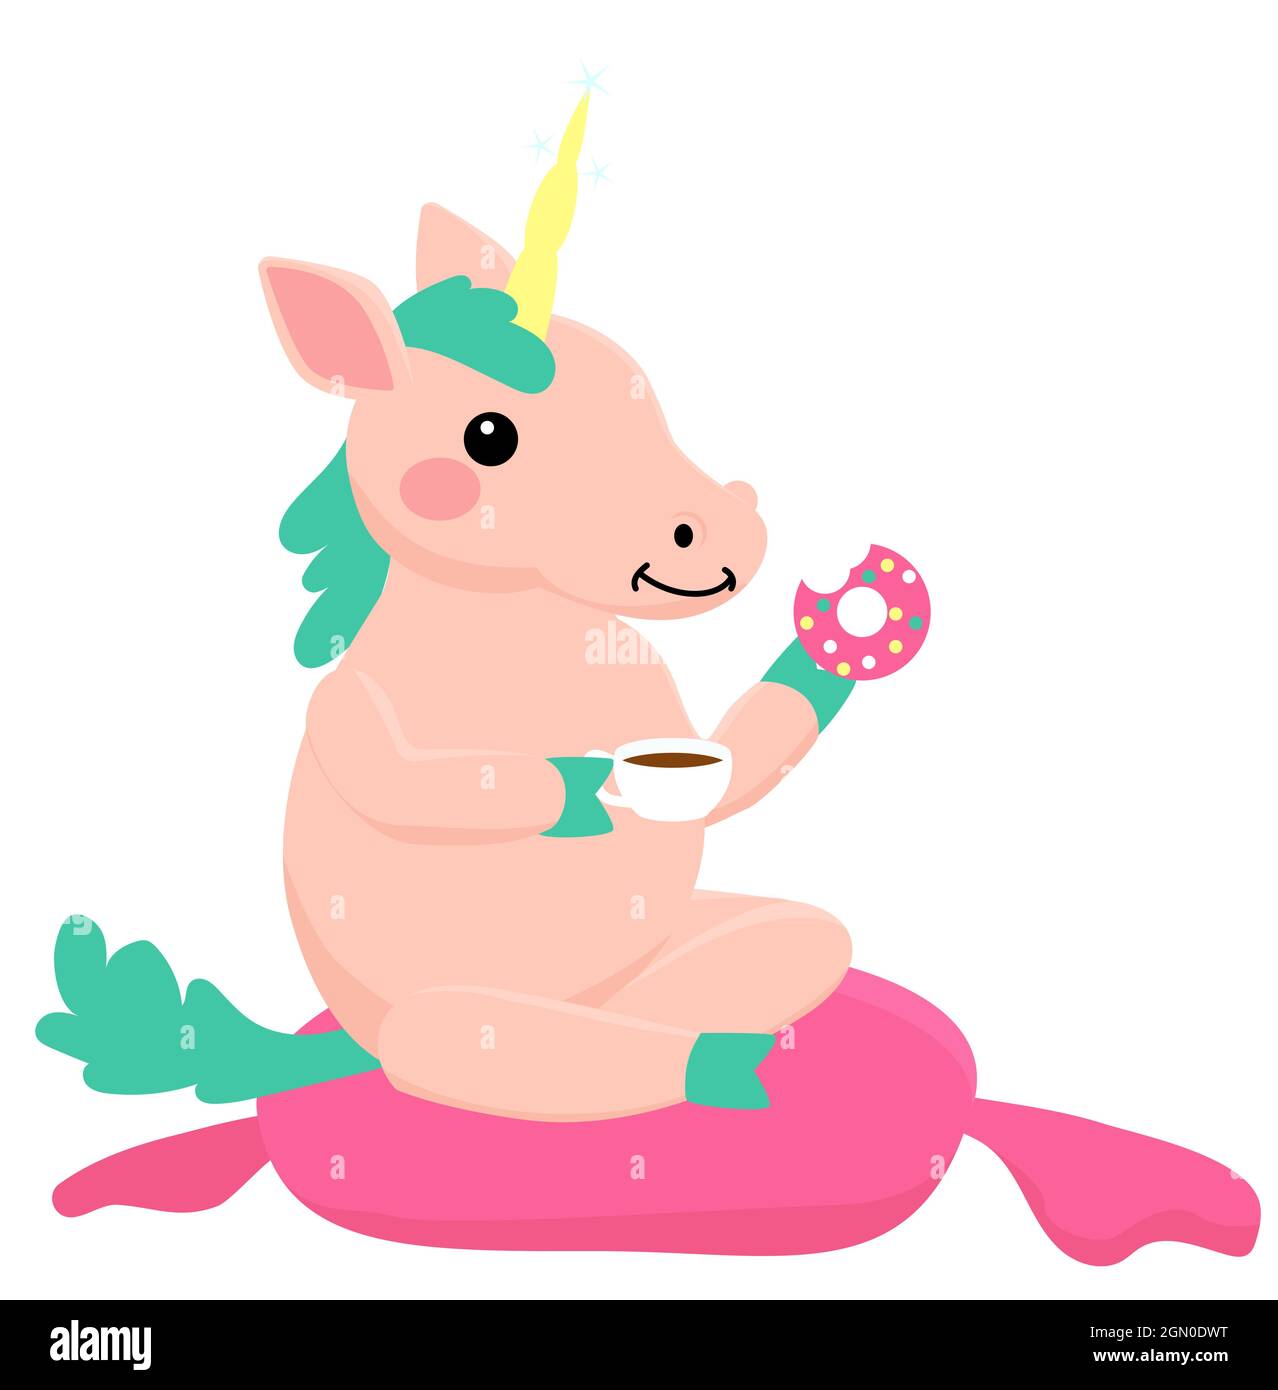 Pink unicorn sitting and eating donut with tea. Vector cute illustration isolated on white. Stock Vector